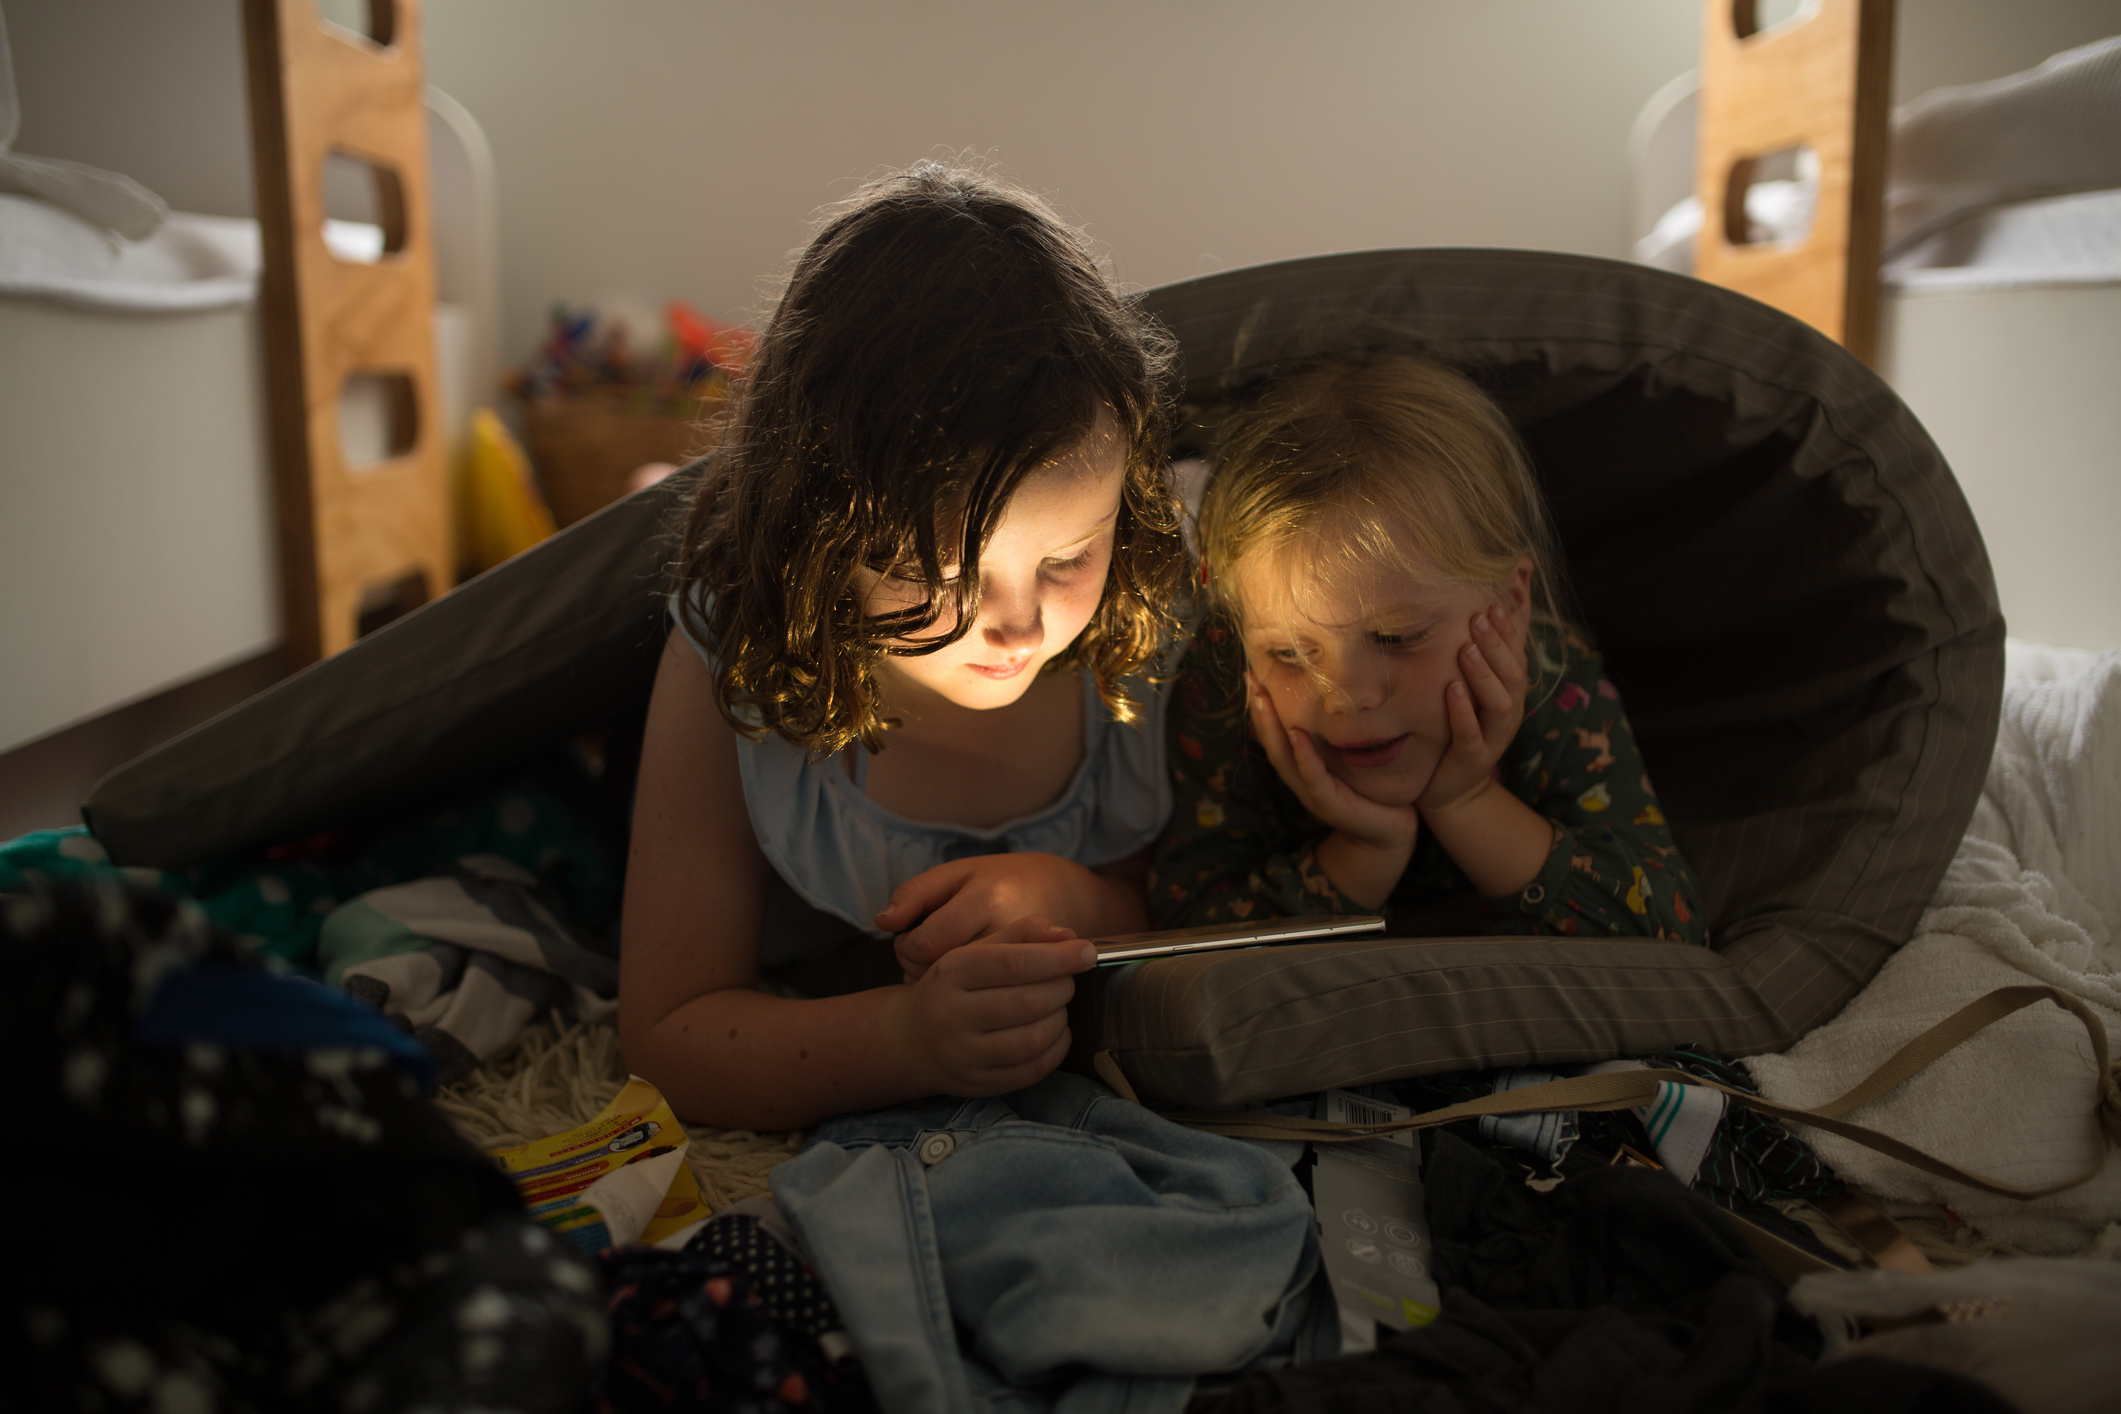 Two girls look at a digital tablet together wrapped in a mattress in a cluttered bedroom